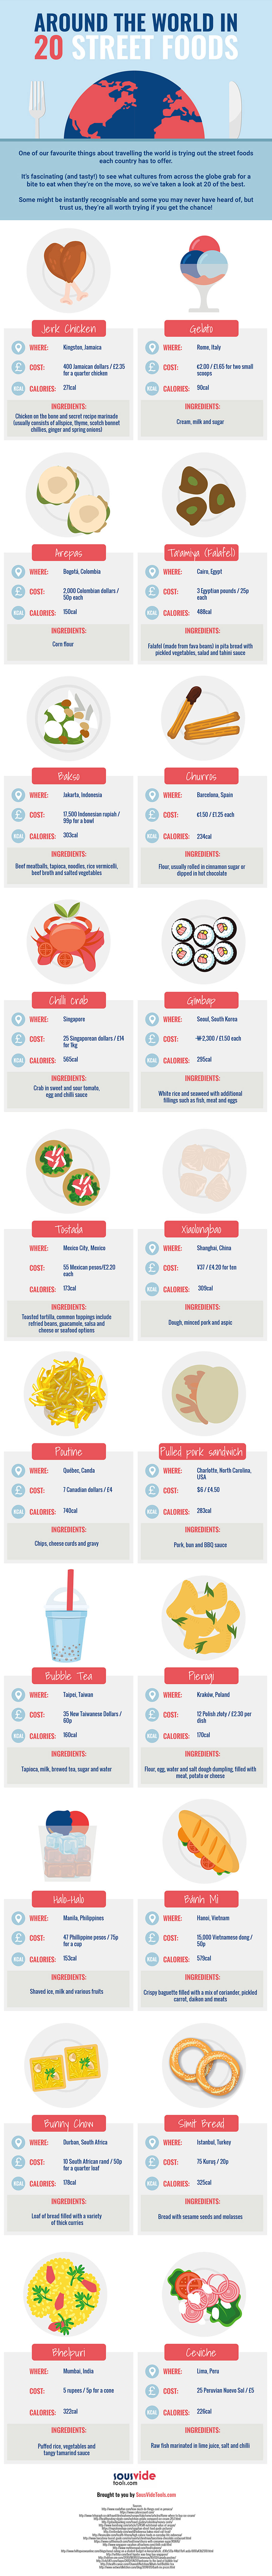 Must Try Street Foods Around the World Infographic